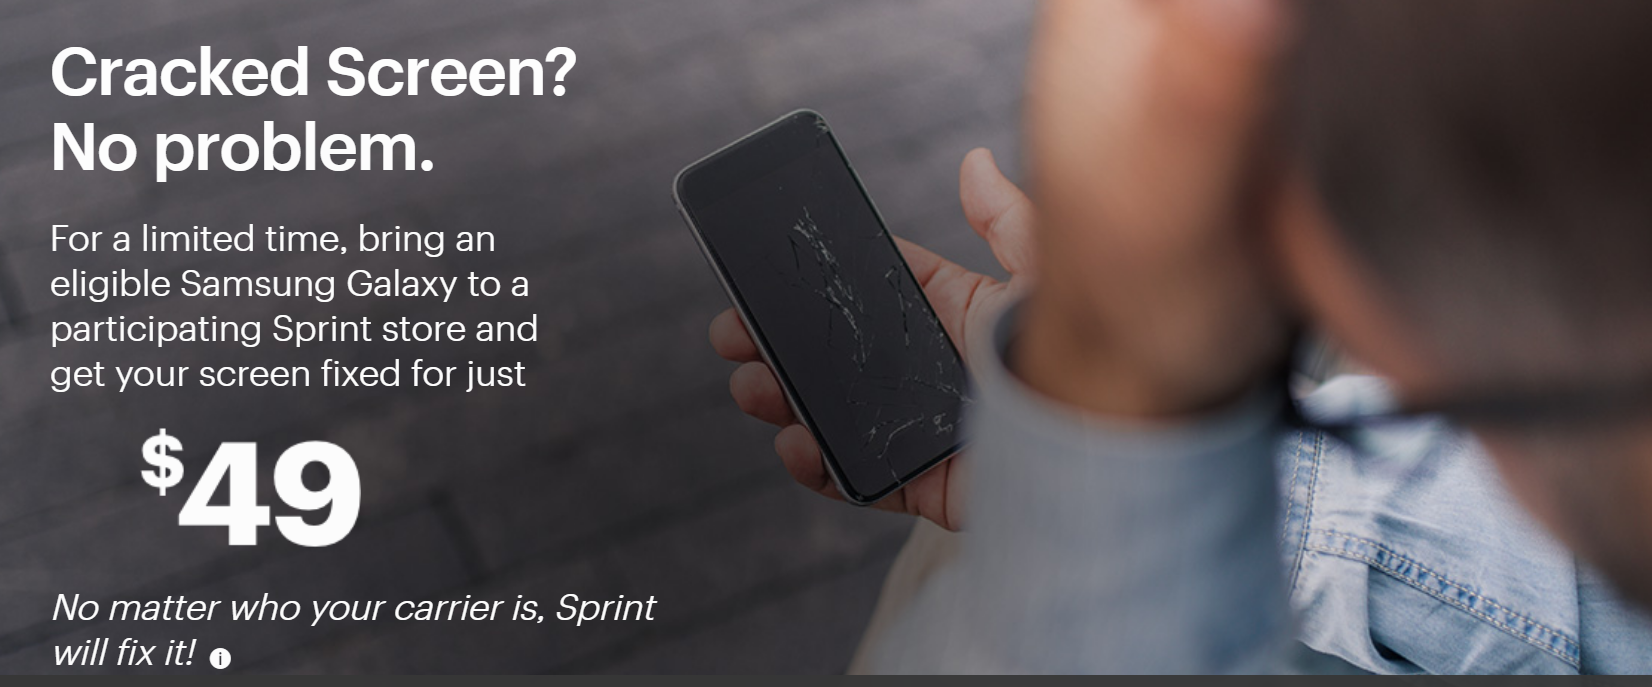 Sprint Stores: Broken Screen Repair for Samsung Galaxy S7, S8, S8+, S9, S9+, Note 8